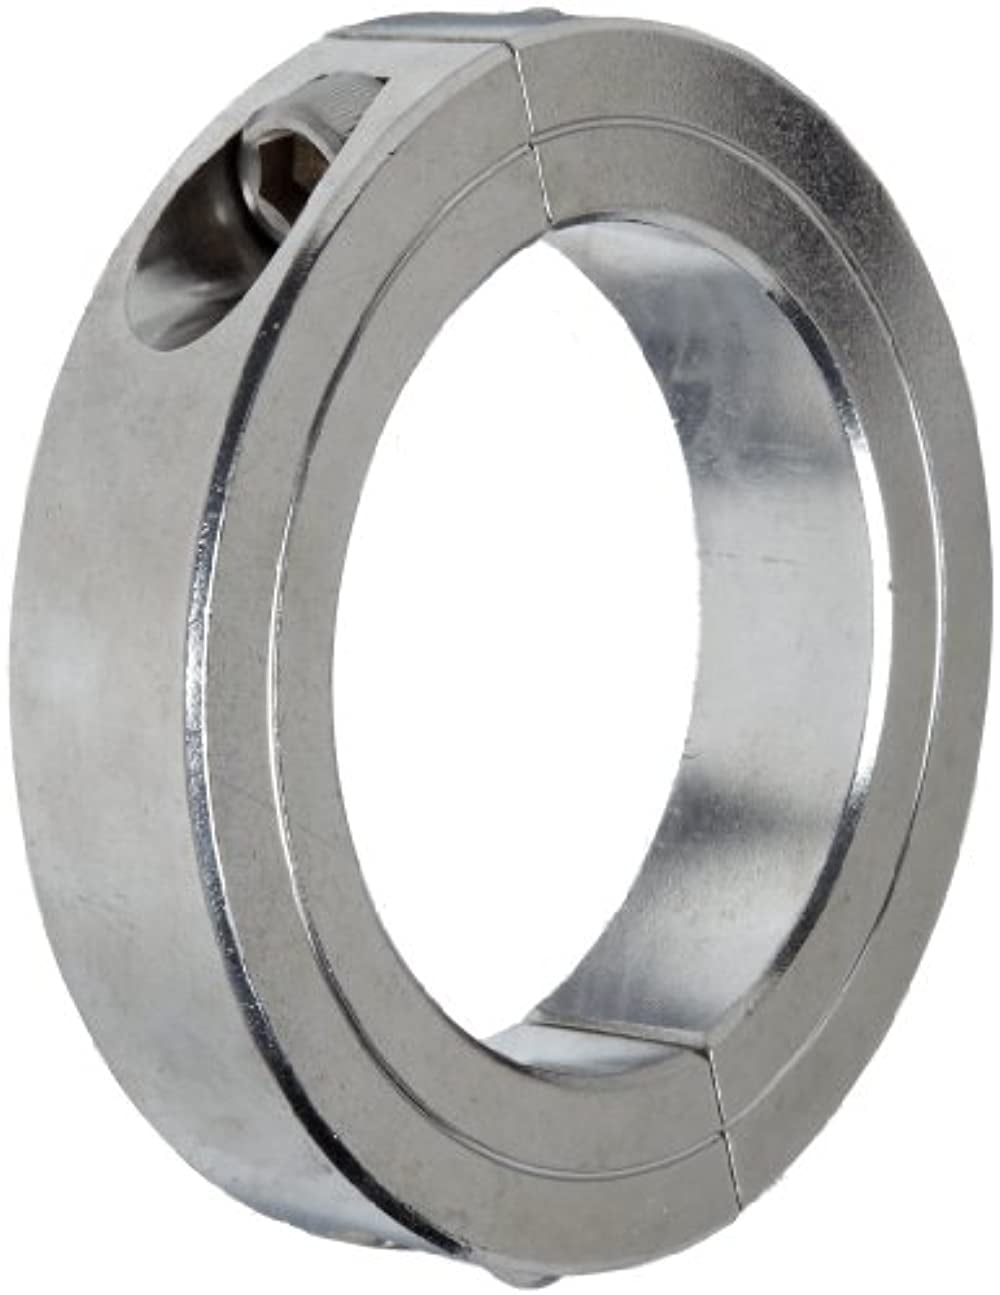 SP-39-ST Whittet-Higgins SC-39S Corrosion Resistant Split Shaft Collar Replaces Climax 2C-243-S SP-39-SS Stafford 8S207, 2C-243-Z H2C-243-S Ruland SP-39-FZ Self-Locking